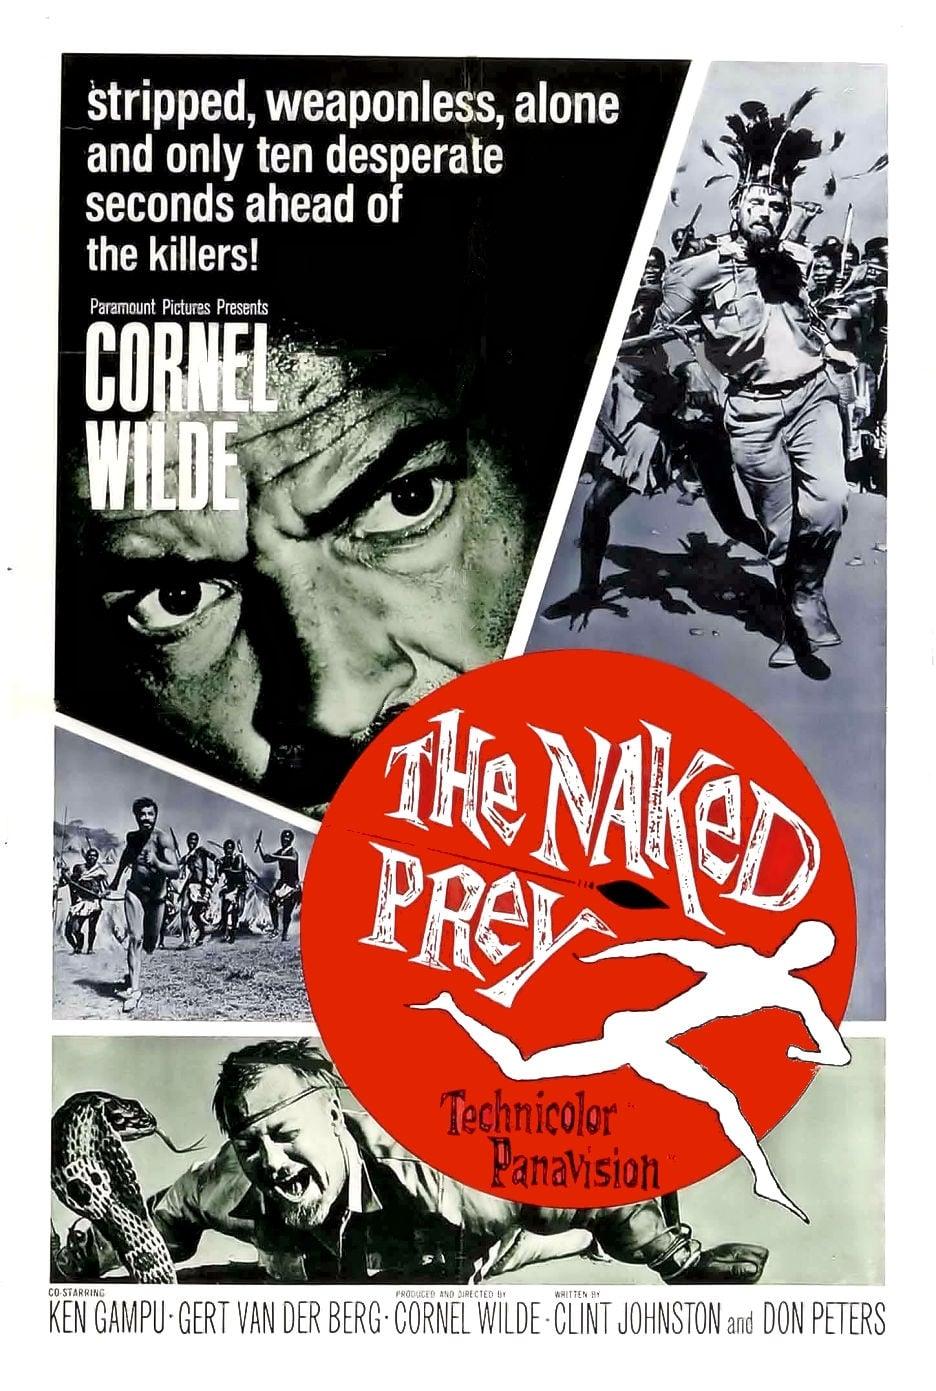 The Naked Prey poster